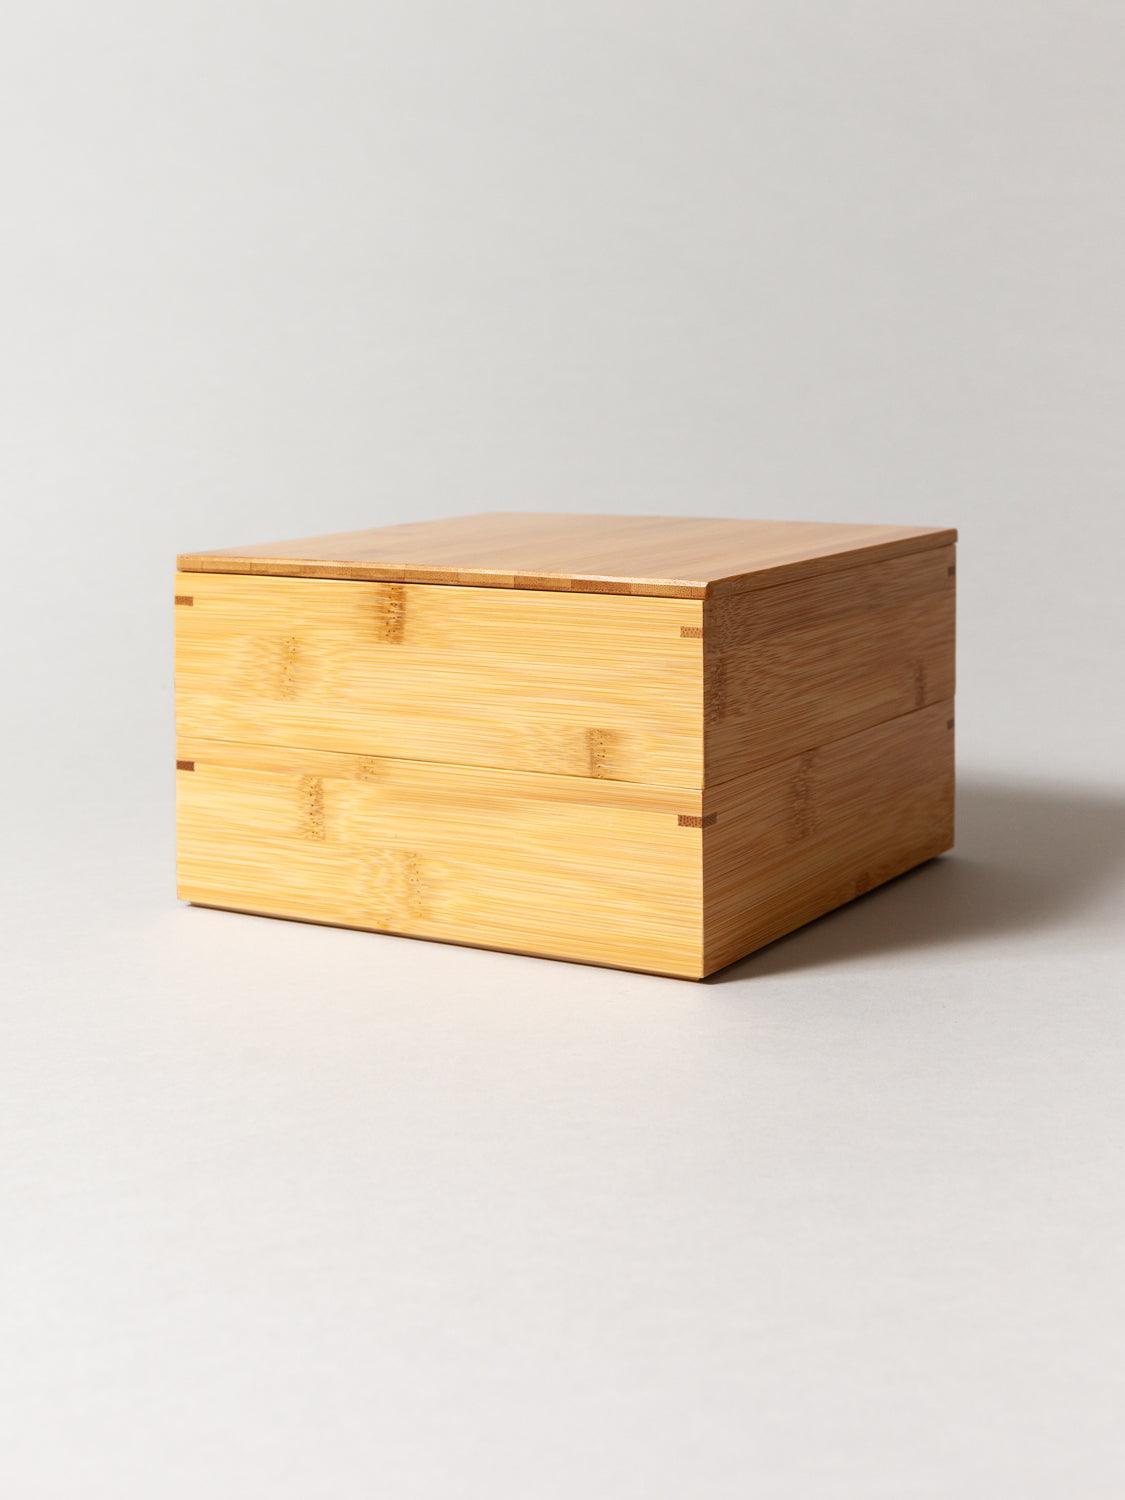 Promotional Wheat Straw Bento Box With Bamboo Lid $7.33